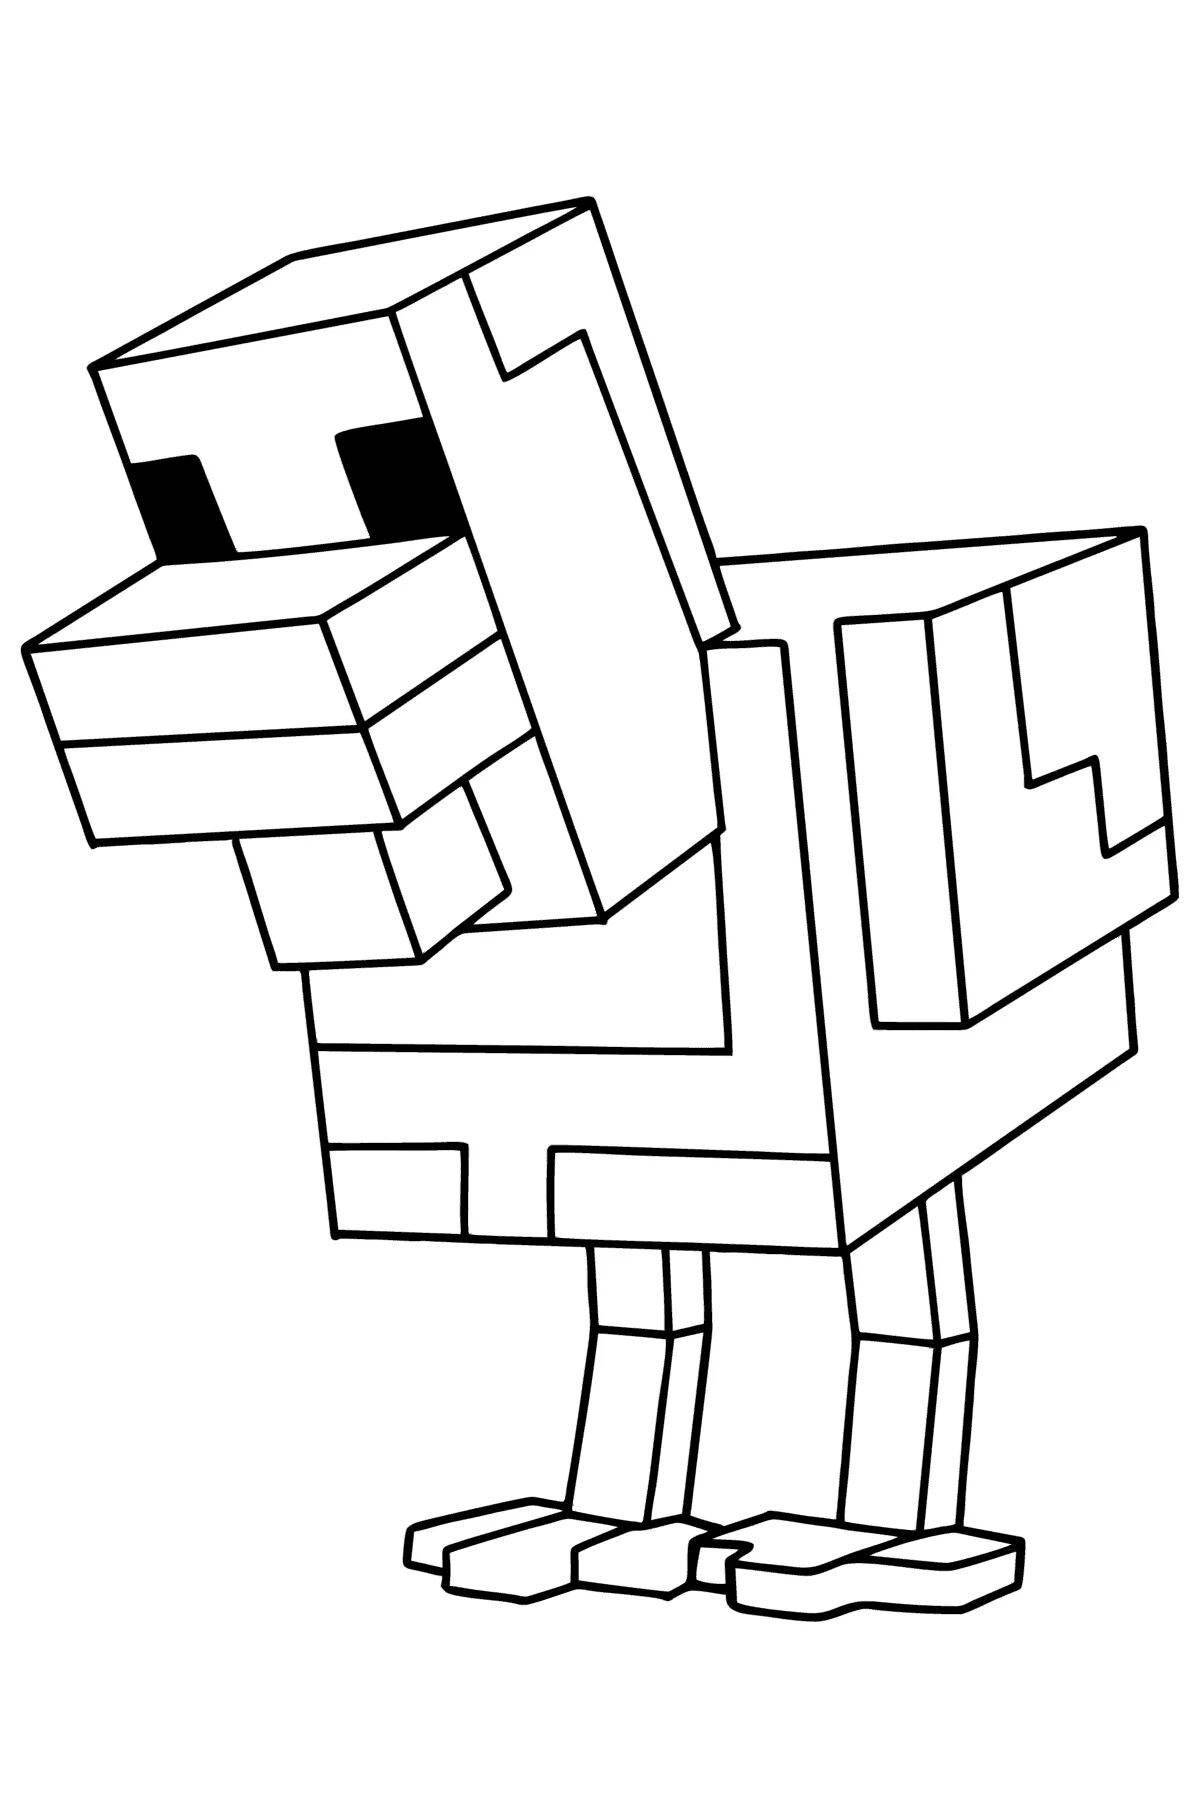 Coloring adorable dog minecraft